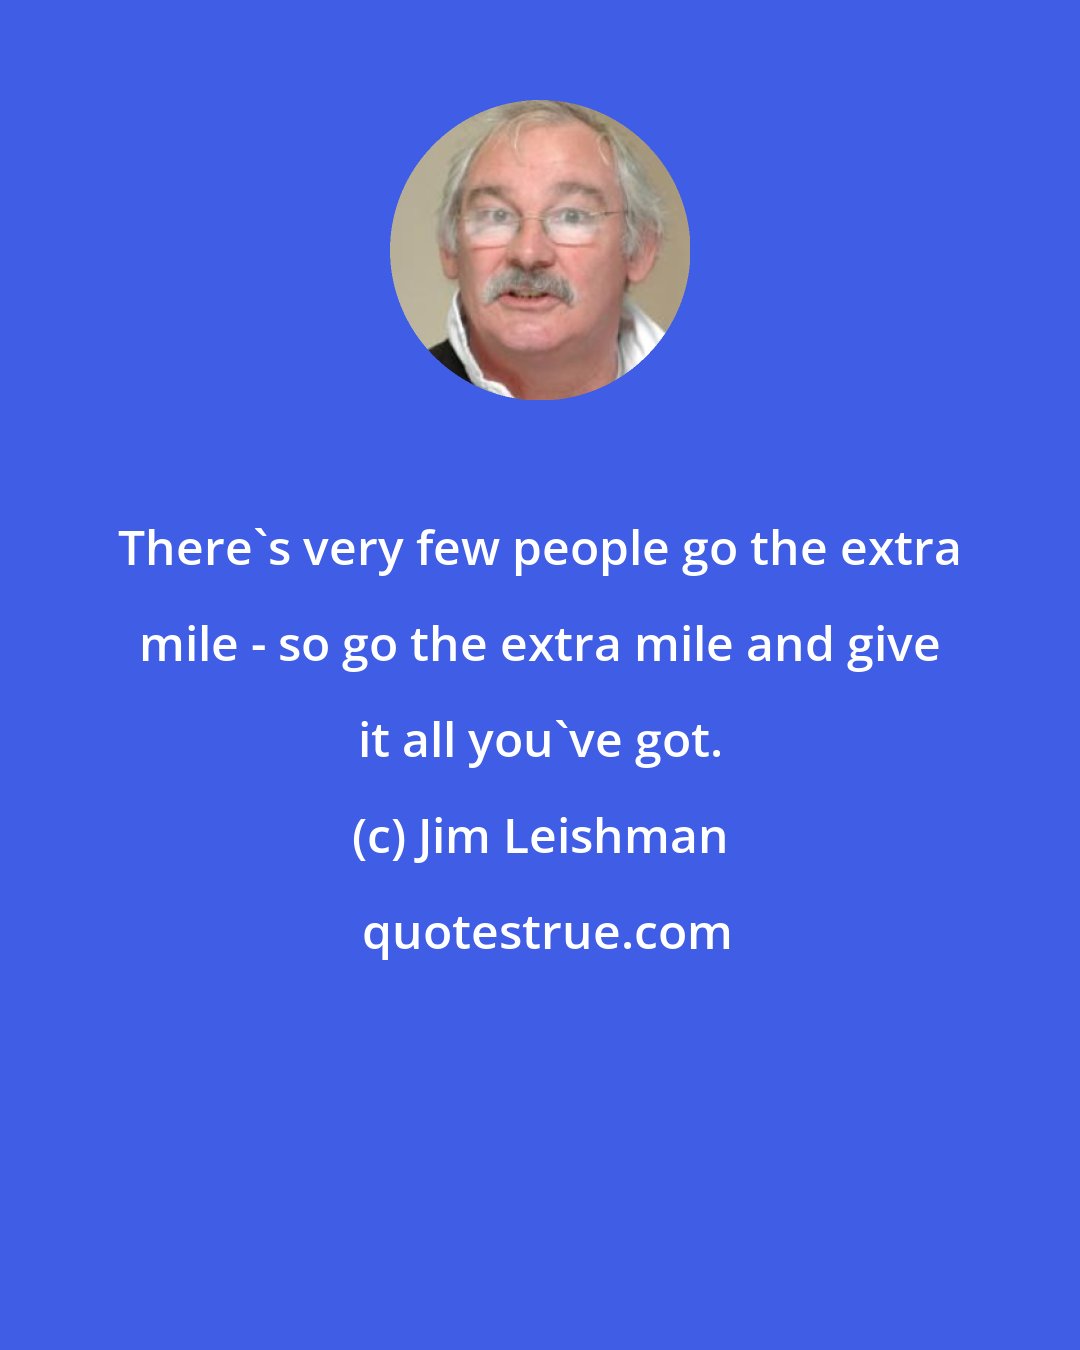 Jim Leishman: There's very few people go the extra mile - so go the extra mile and give it all you've got.